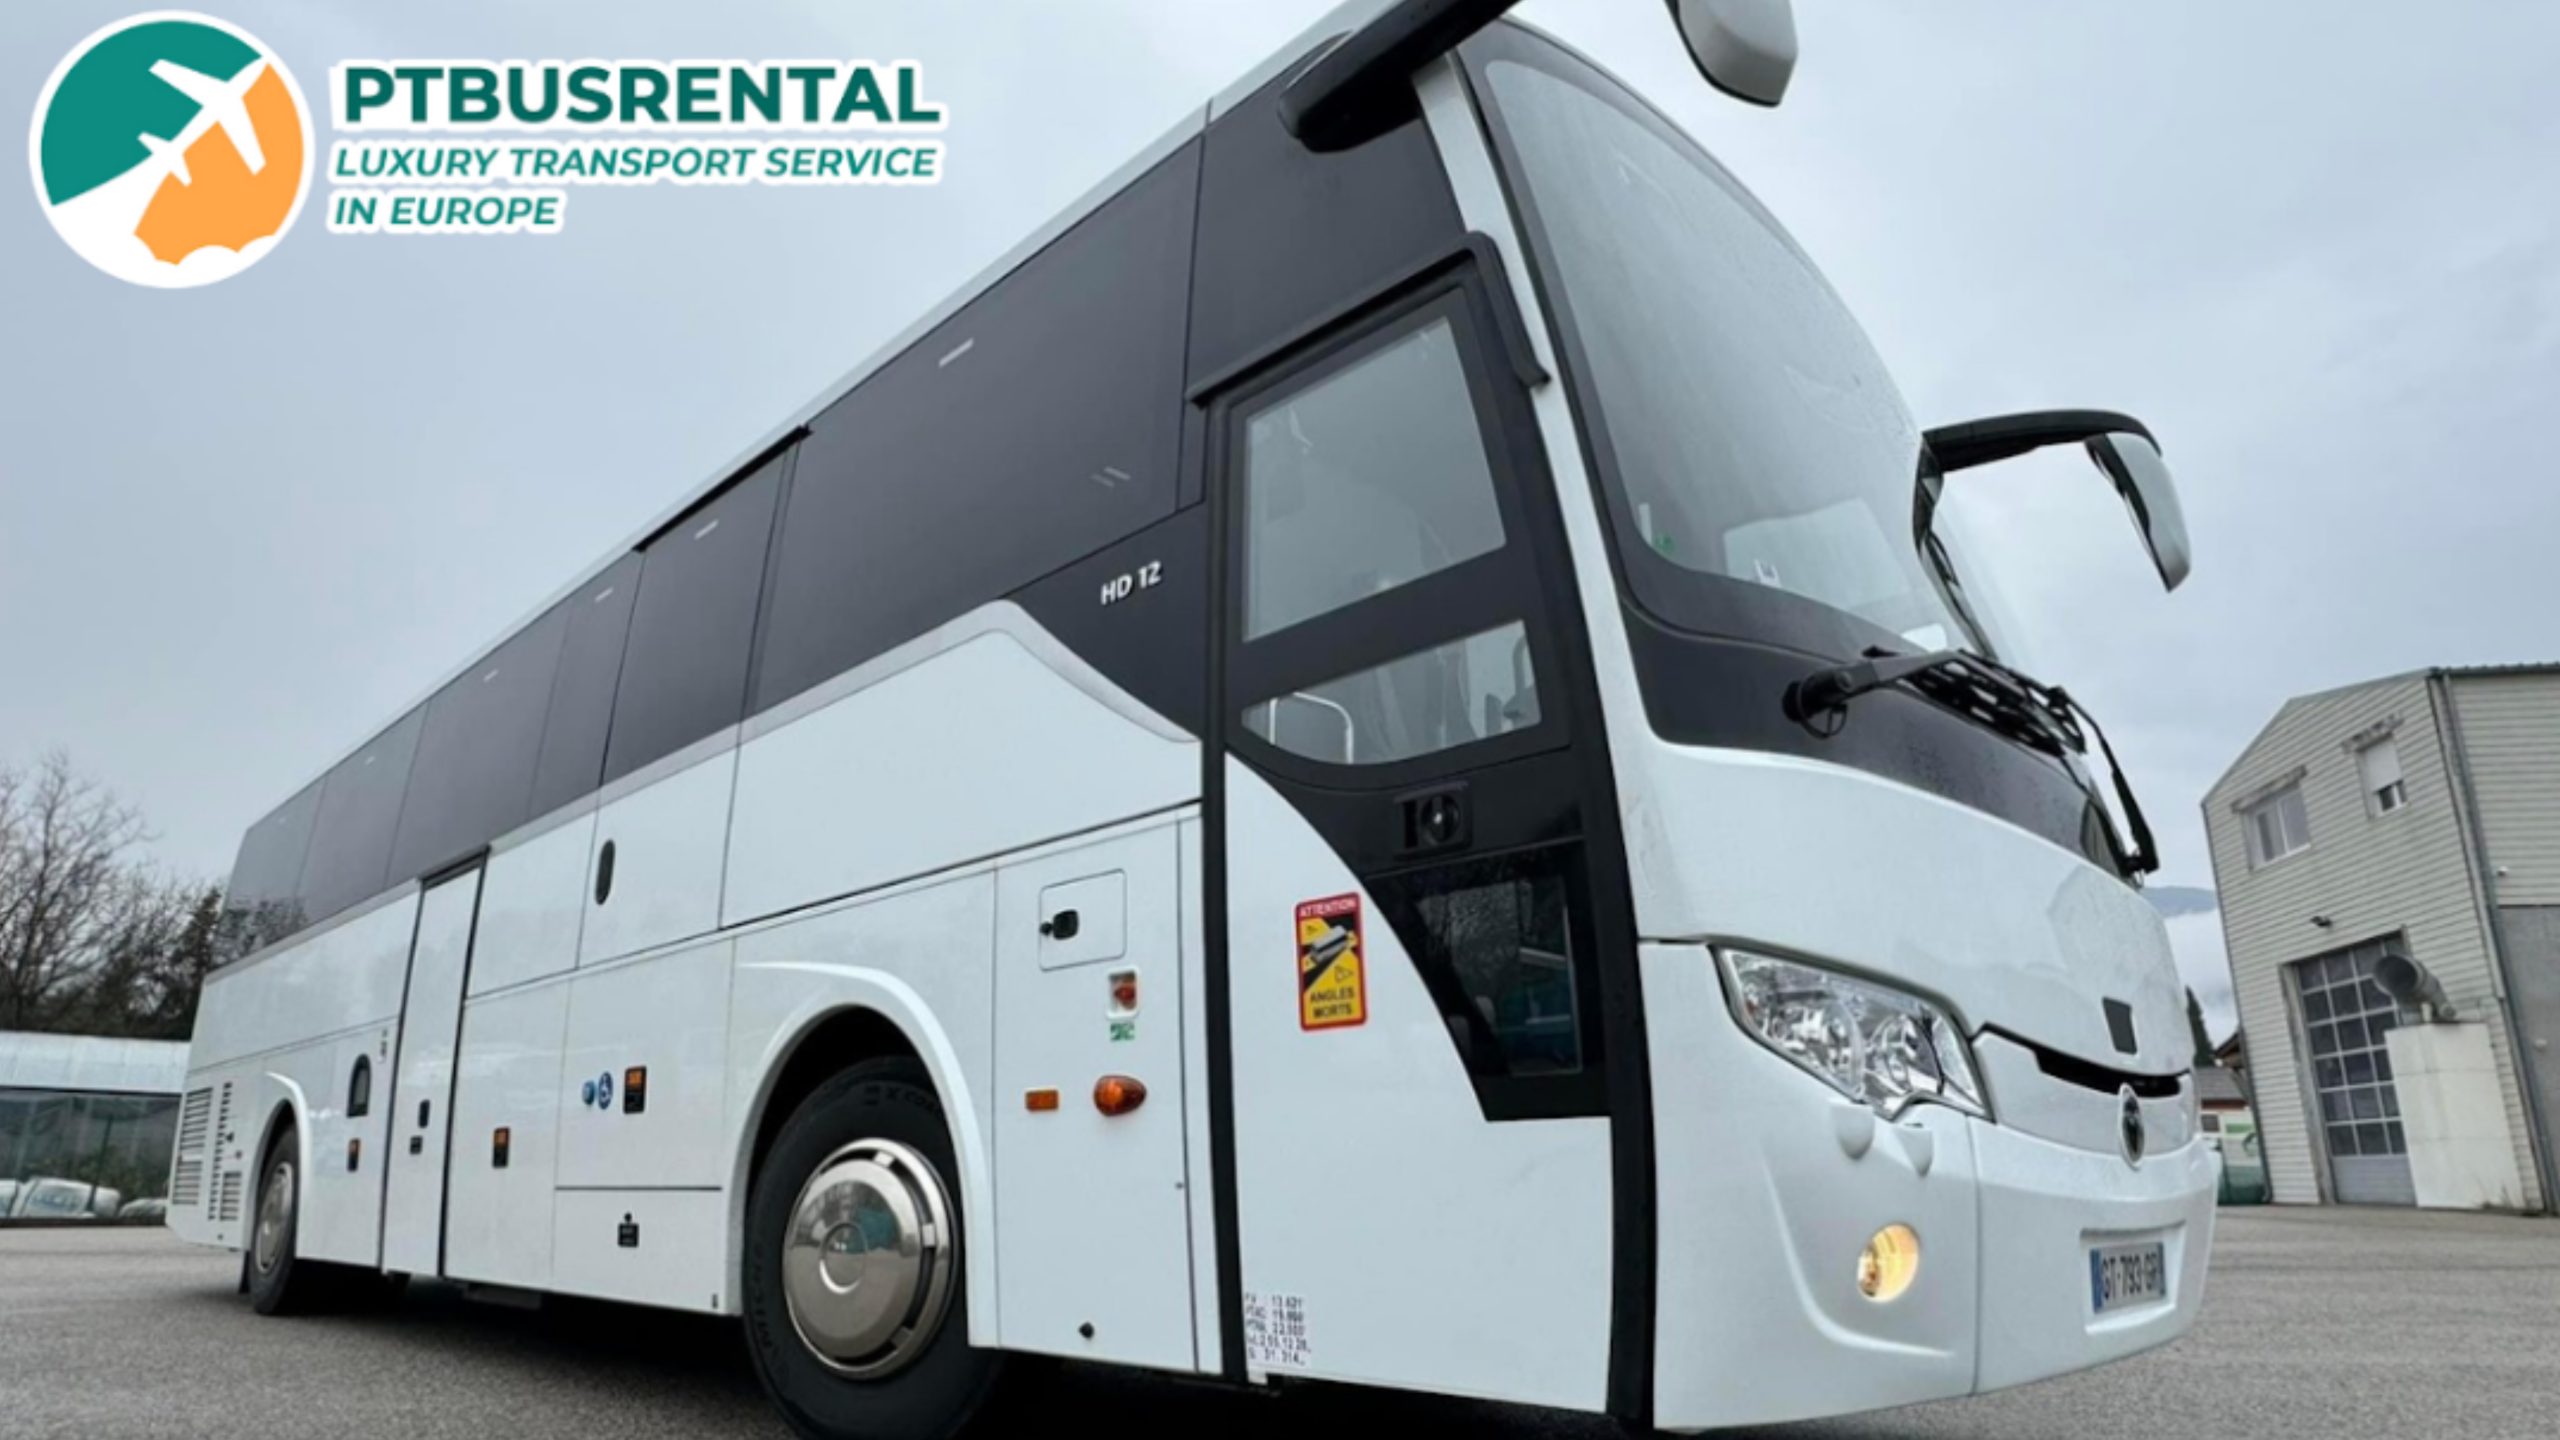 Let's board PTBusrental's Germany coach hire trip to do 10 best things to do in Germany